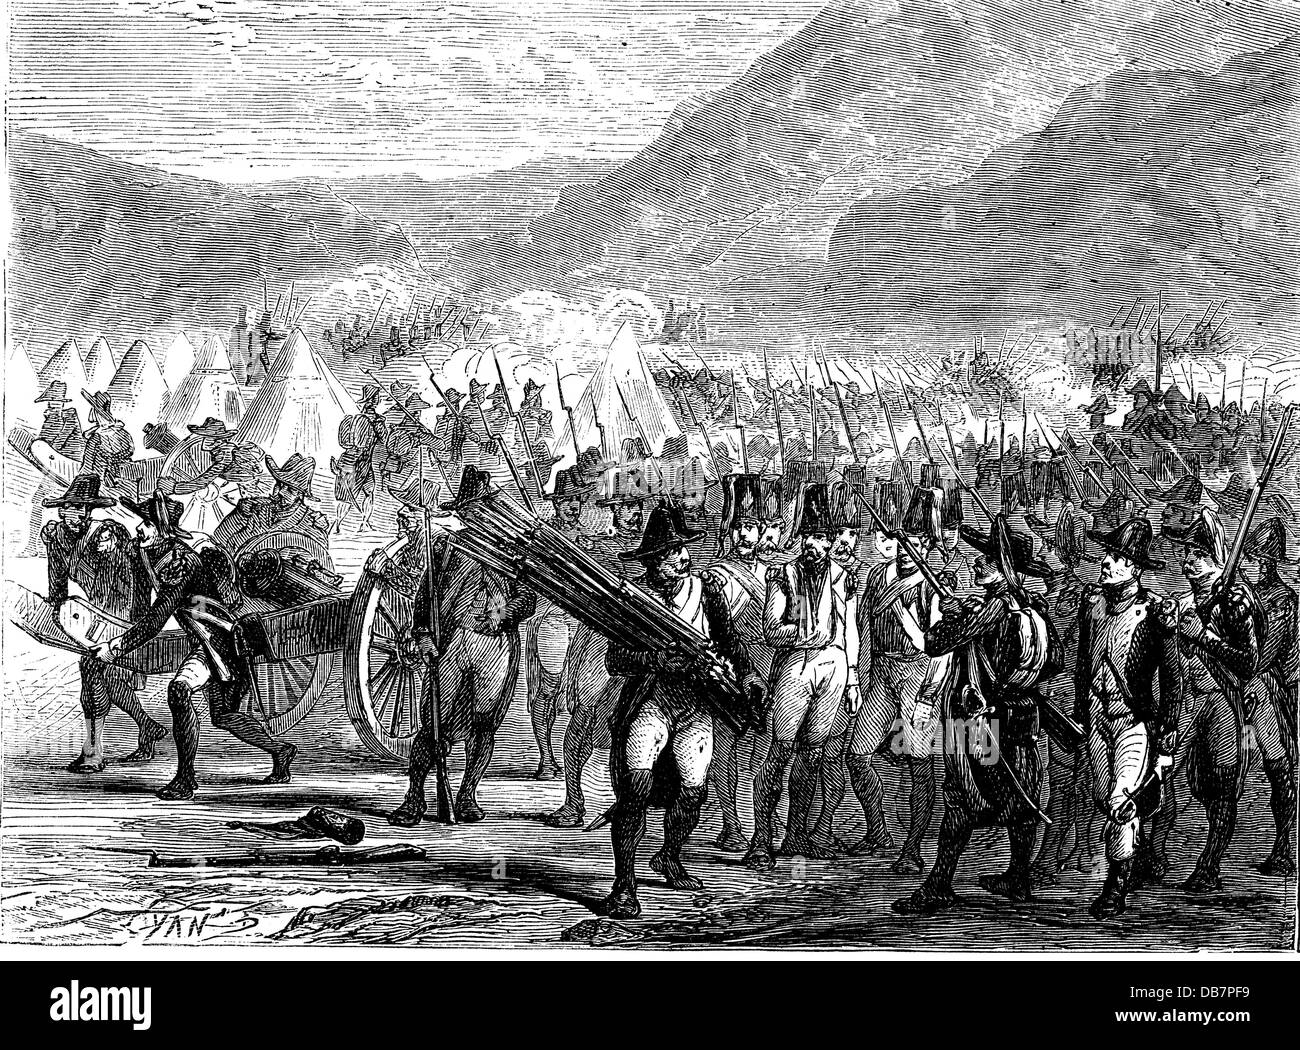 Peninsula War 1807 - 1814, French troops on foot of the Pyrenees, 1808, wood engraving, 19th century, France, Spain, camp, camps, soldiers, soldier, Napoleonic Wars, mountains, mountain, historic, historical, people, Additional-Rights-Clearences-Not Available Stock Photo